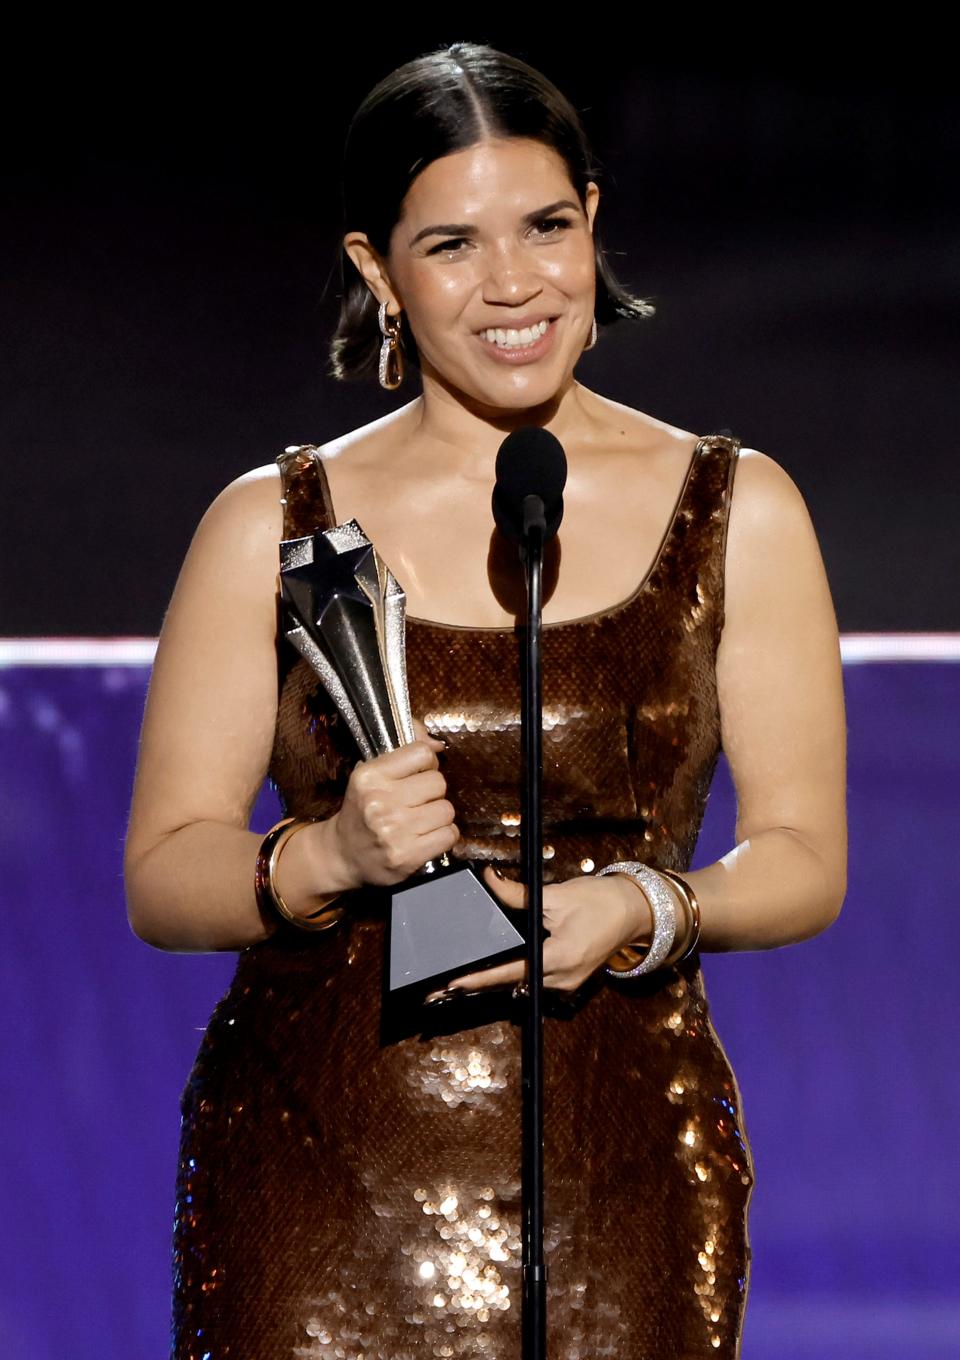 America Ferrera gave a stirring speech about representation as she accepted the SeeHer Award at the Critics Choice Awards.